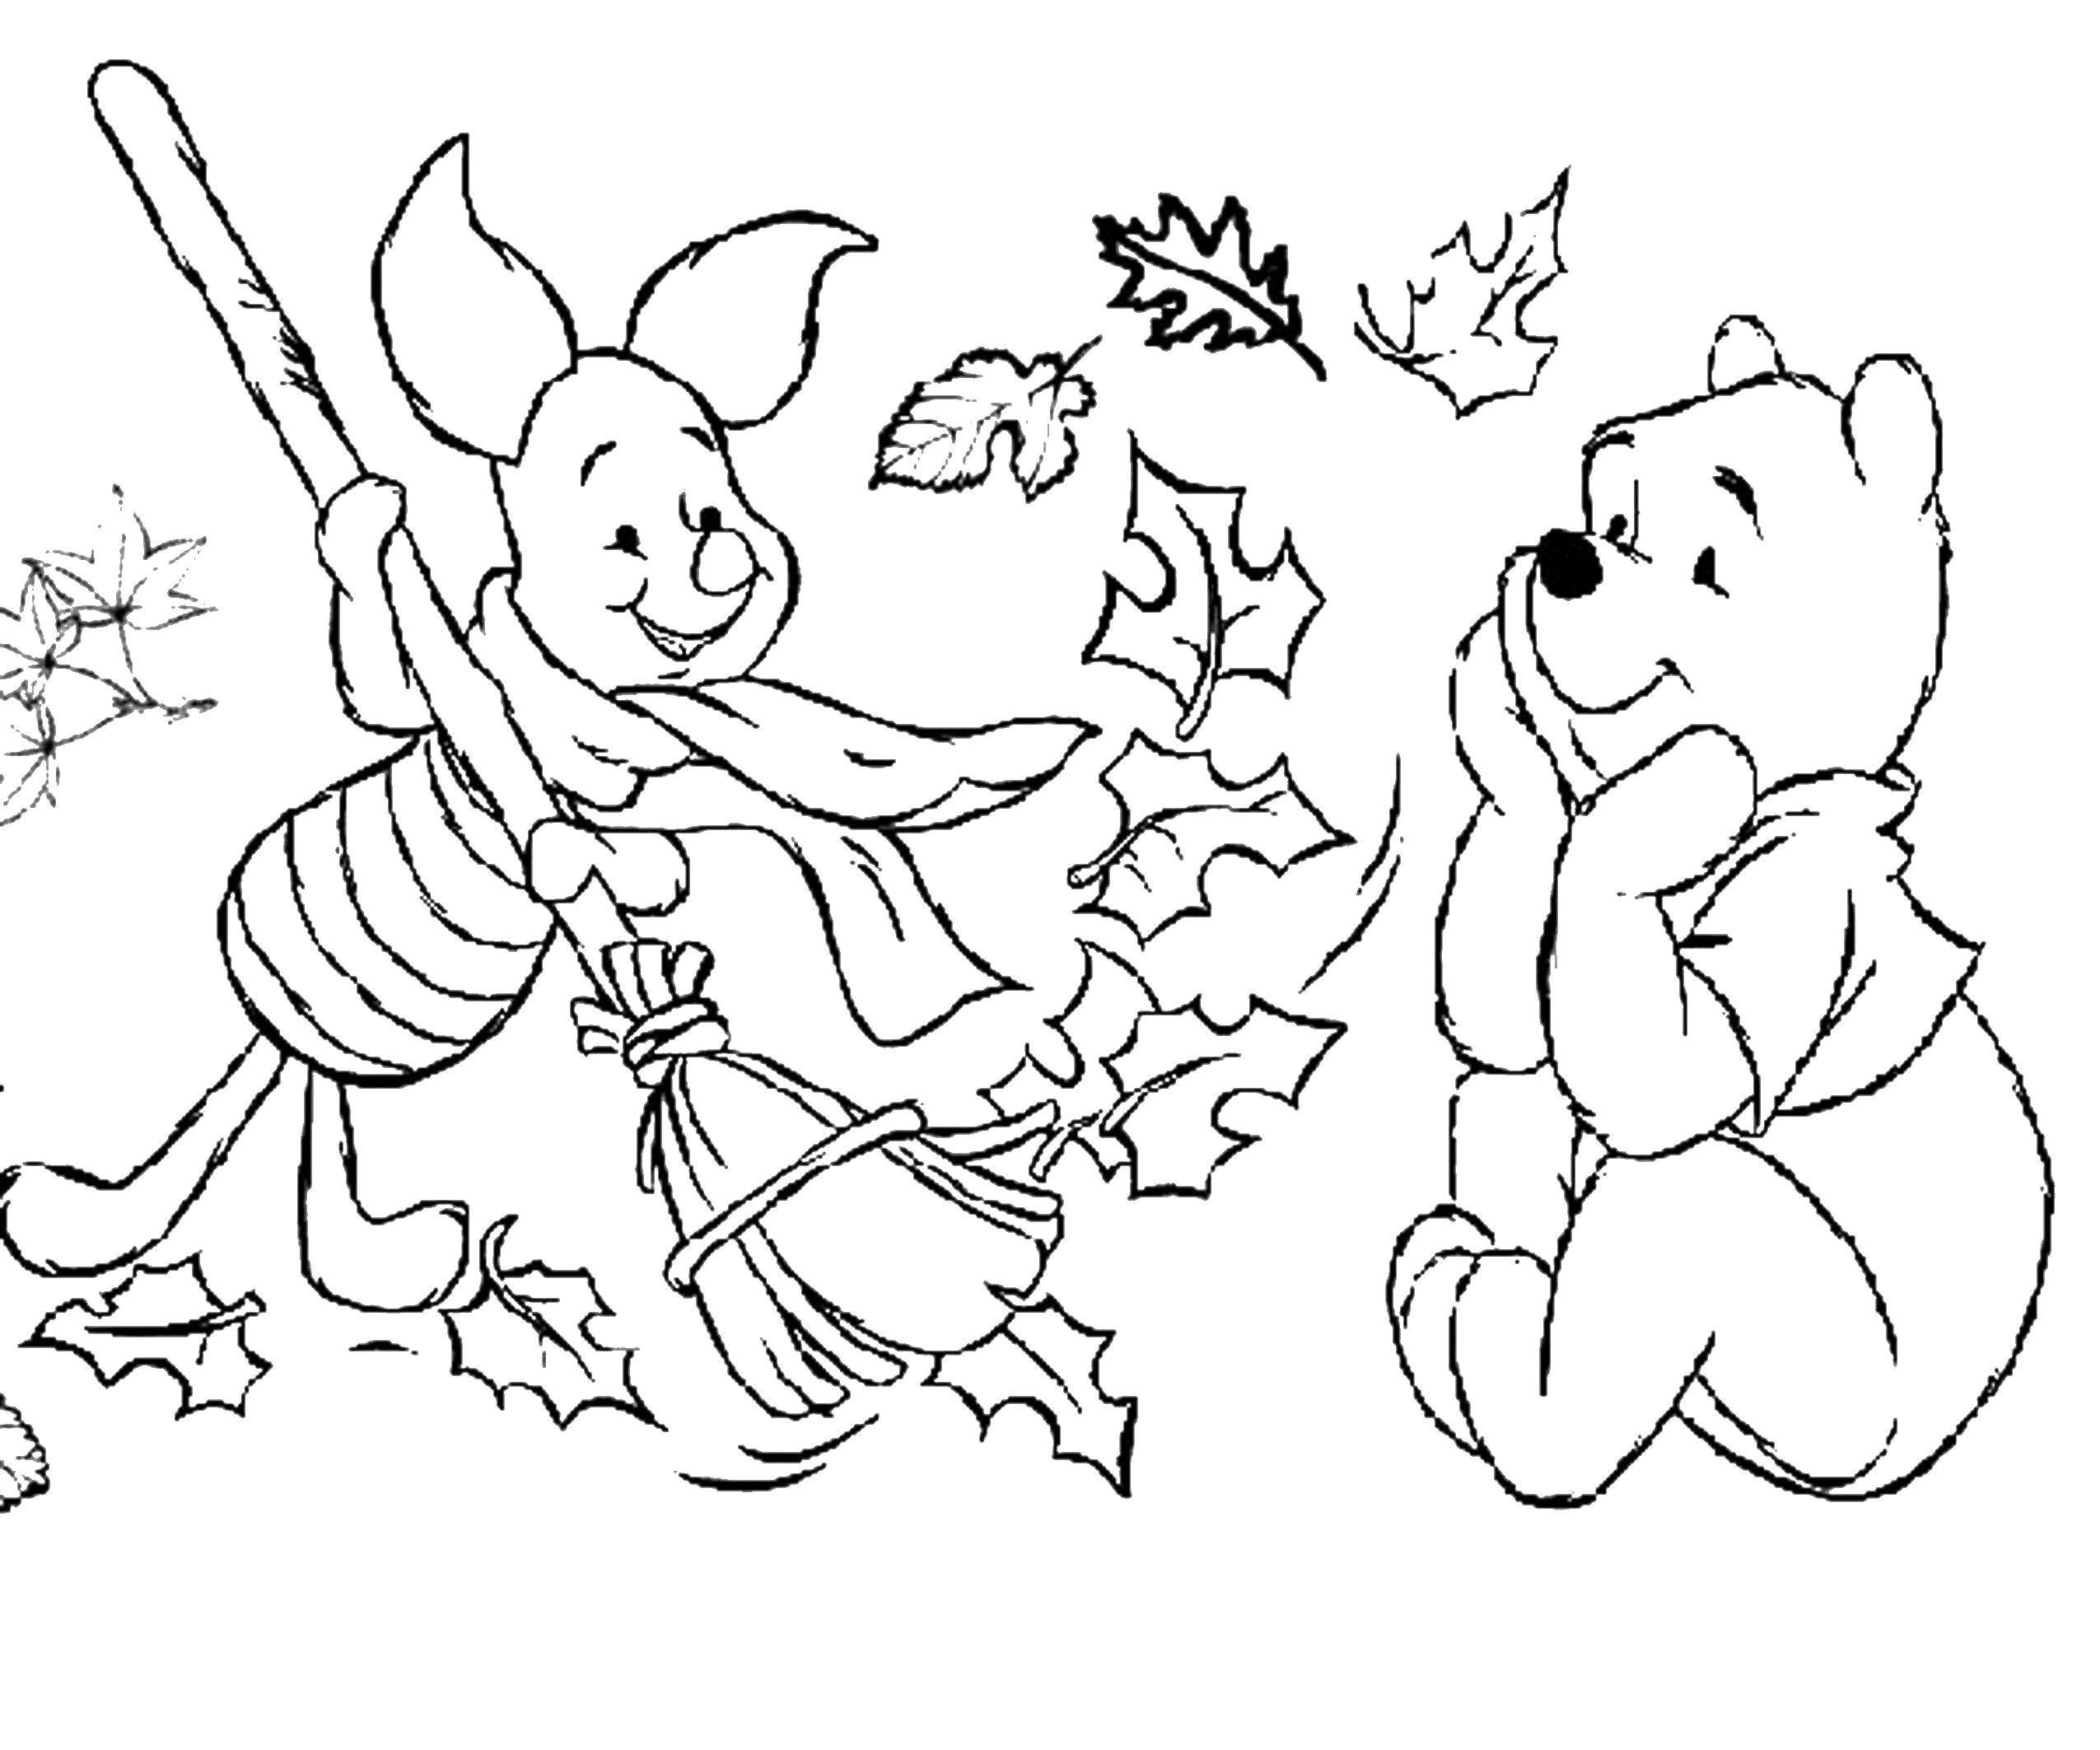 Coloring Winnie and Piglet collect leaves. Category Autumn leaves falling. Tags:  Winnie, Piglet, broom, leaves.